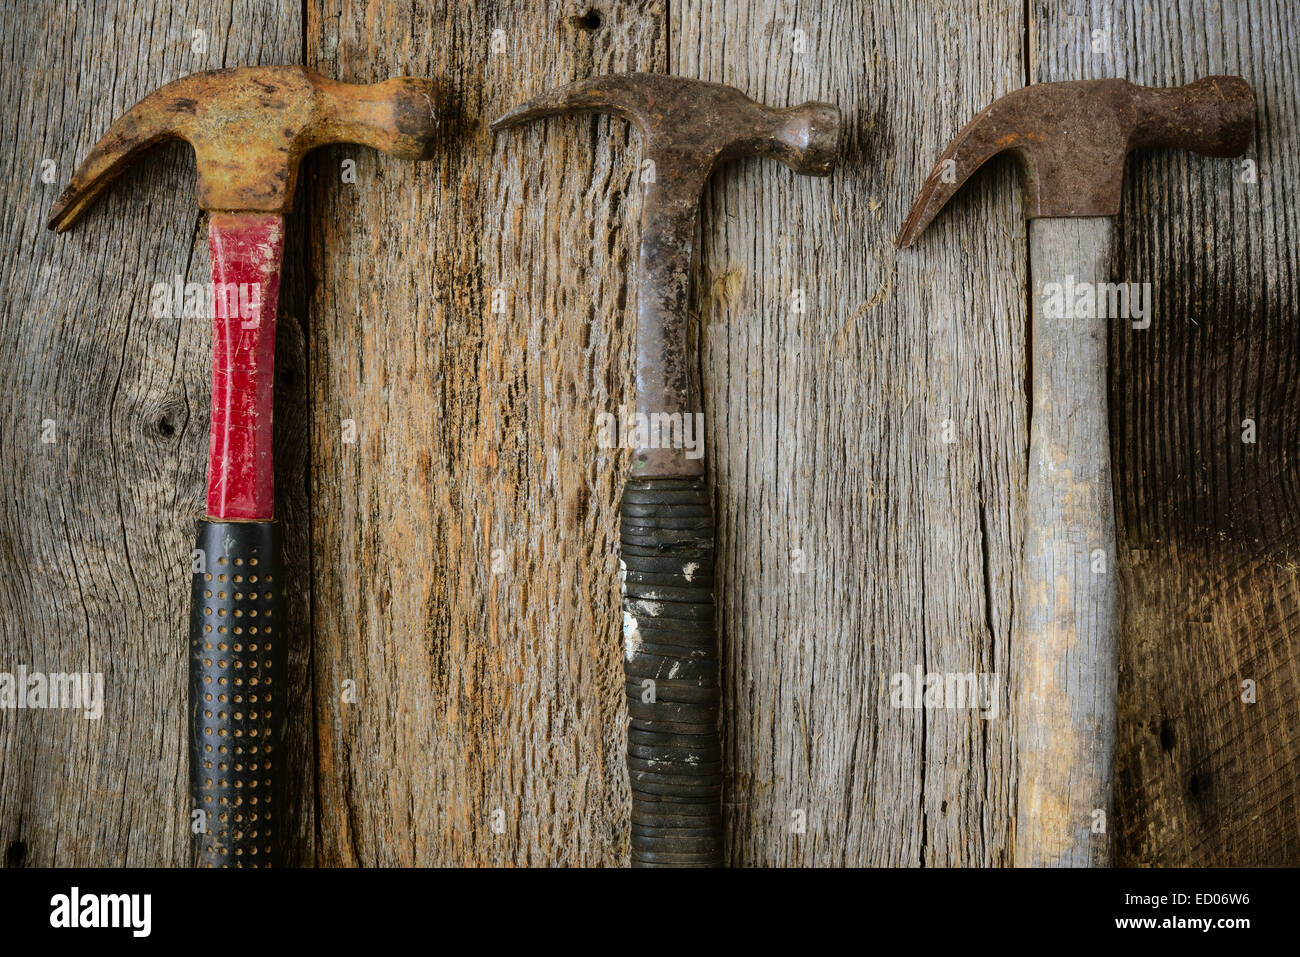 Old Hammers on Rustic Wood Background Stock Photo